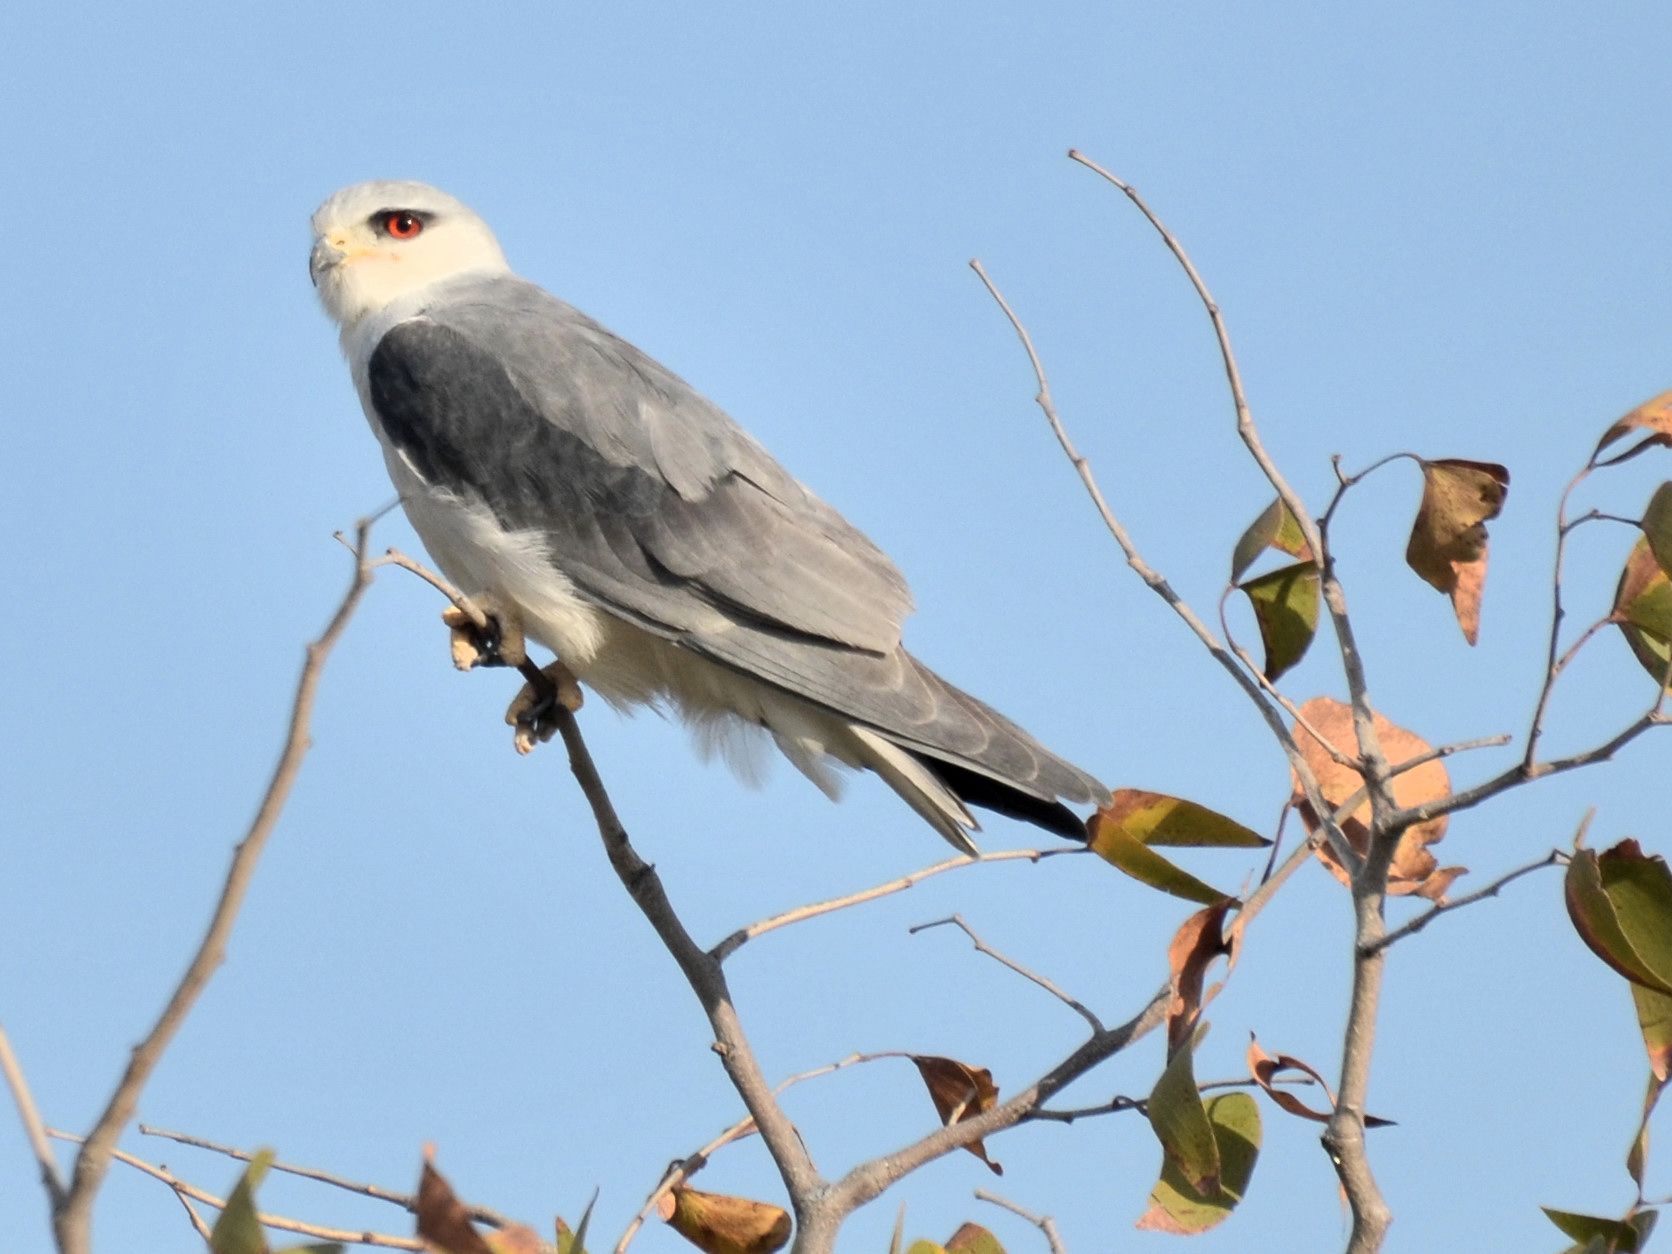 Click picture to see more Black-shouldered Kites.